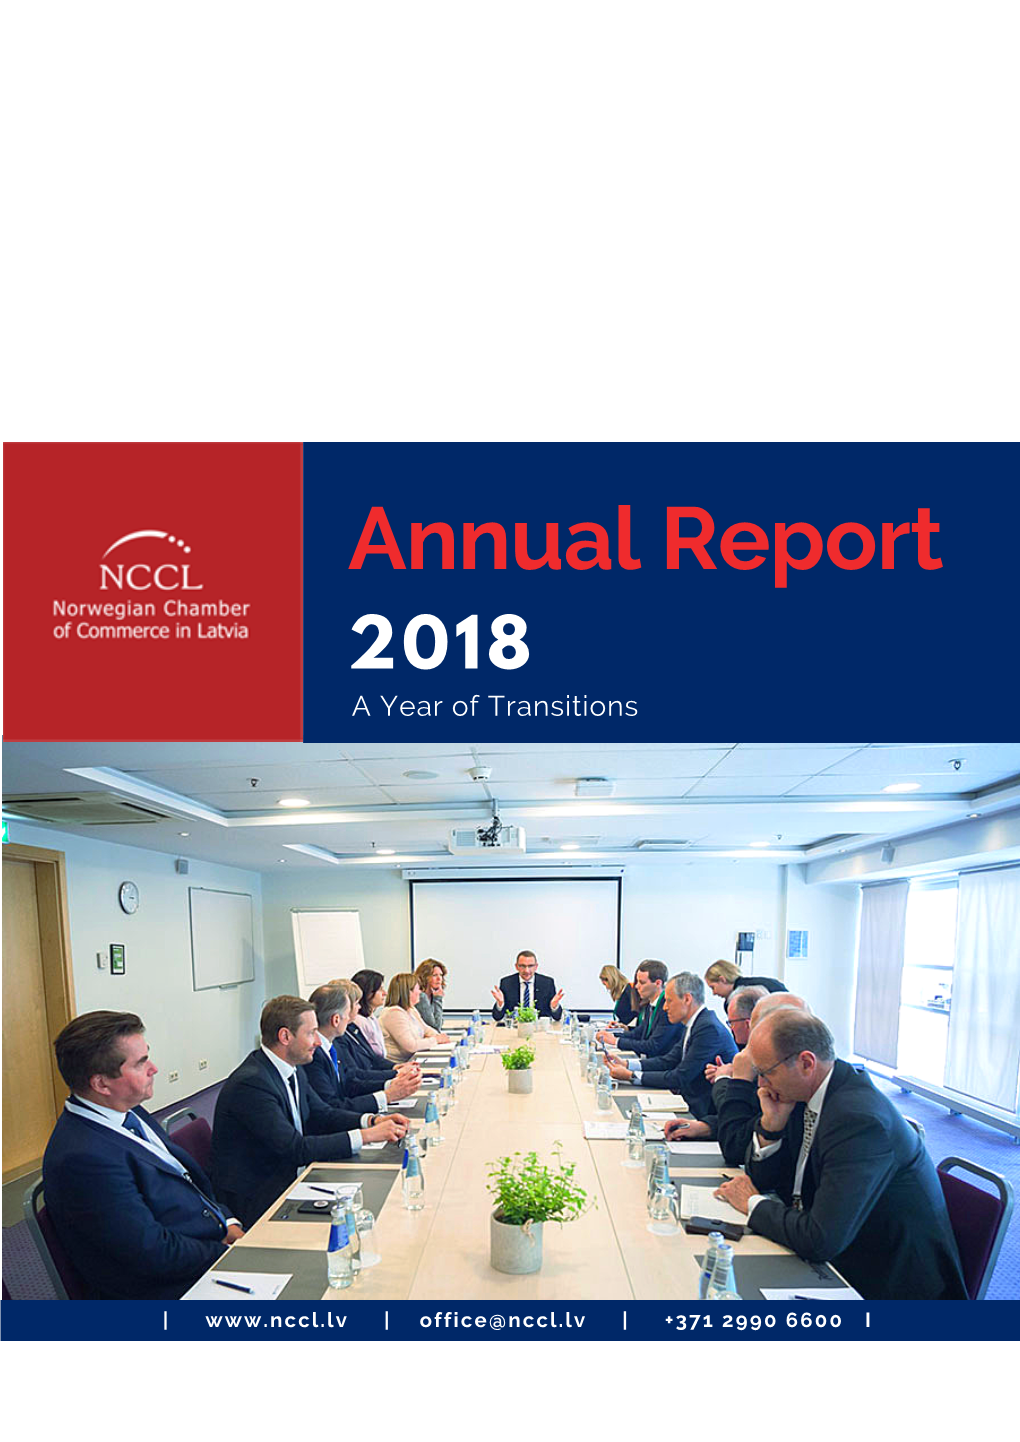 Annual Report 2018 a Year of Transitions